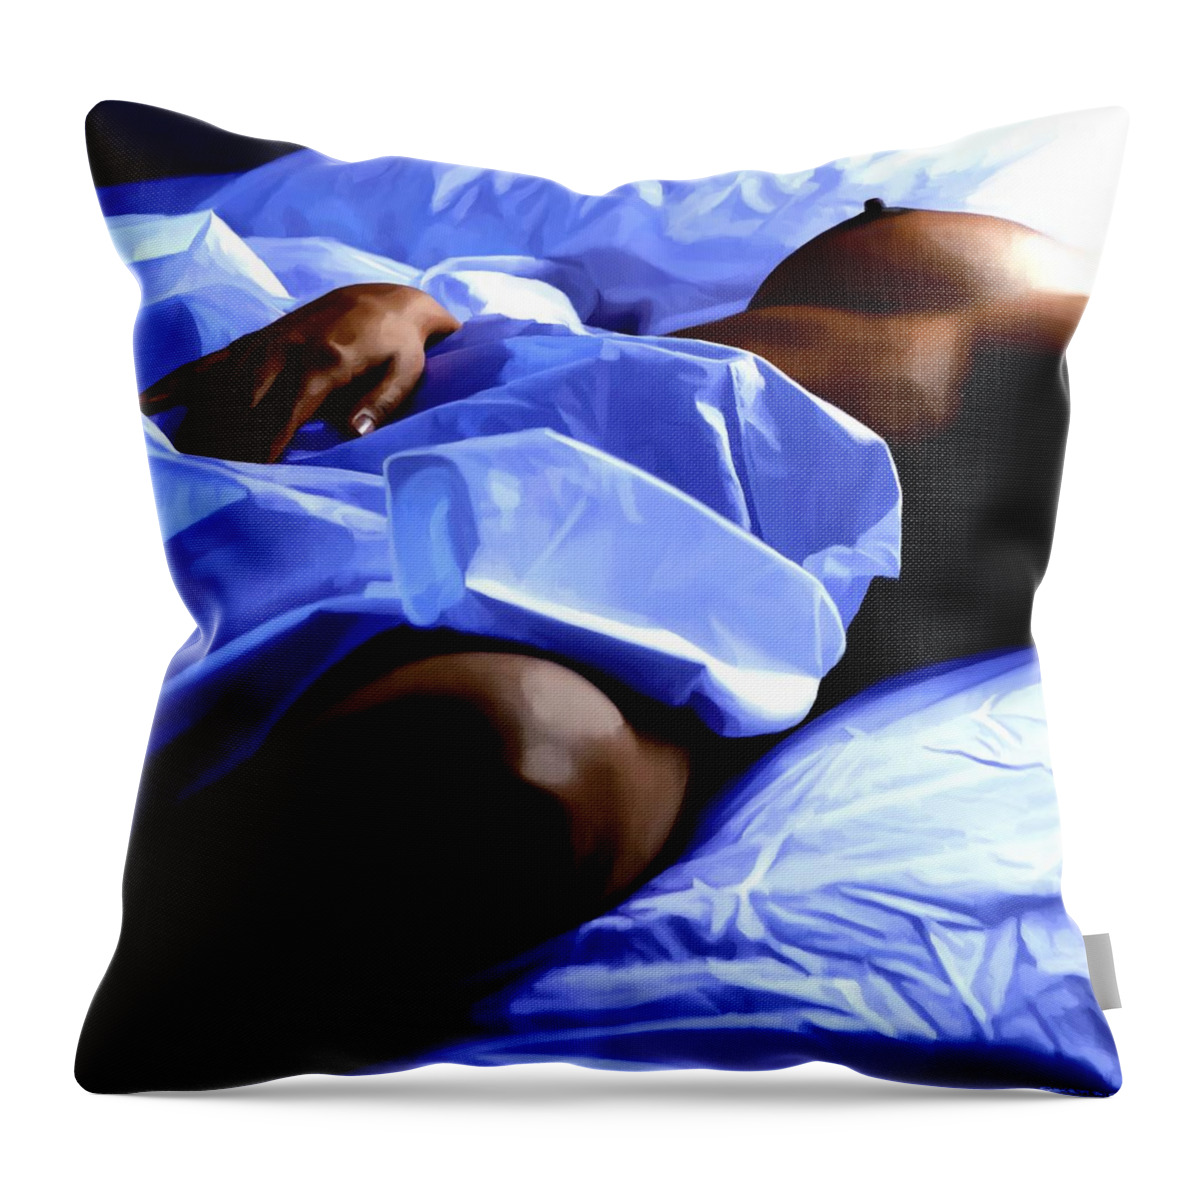 Hot Dreams Throw Pillow featuring the mixed media Hot Dreams #1 by Gabriel T Toro